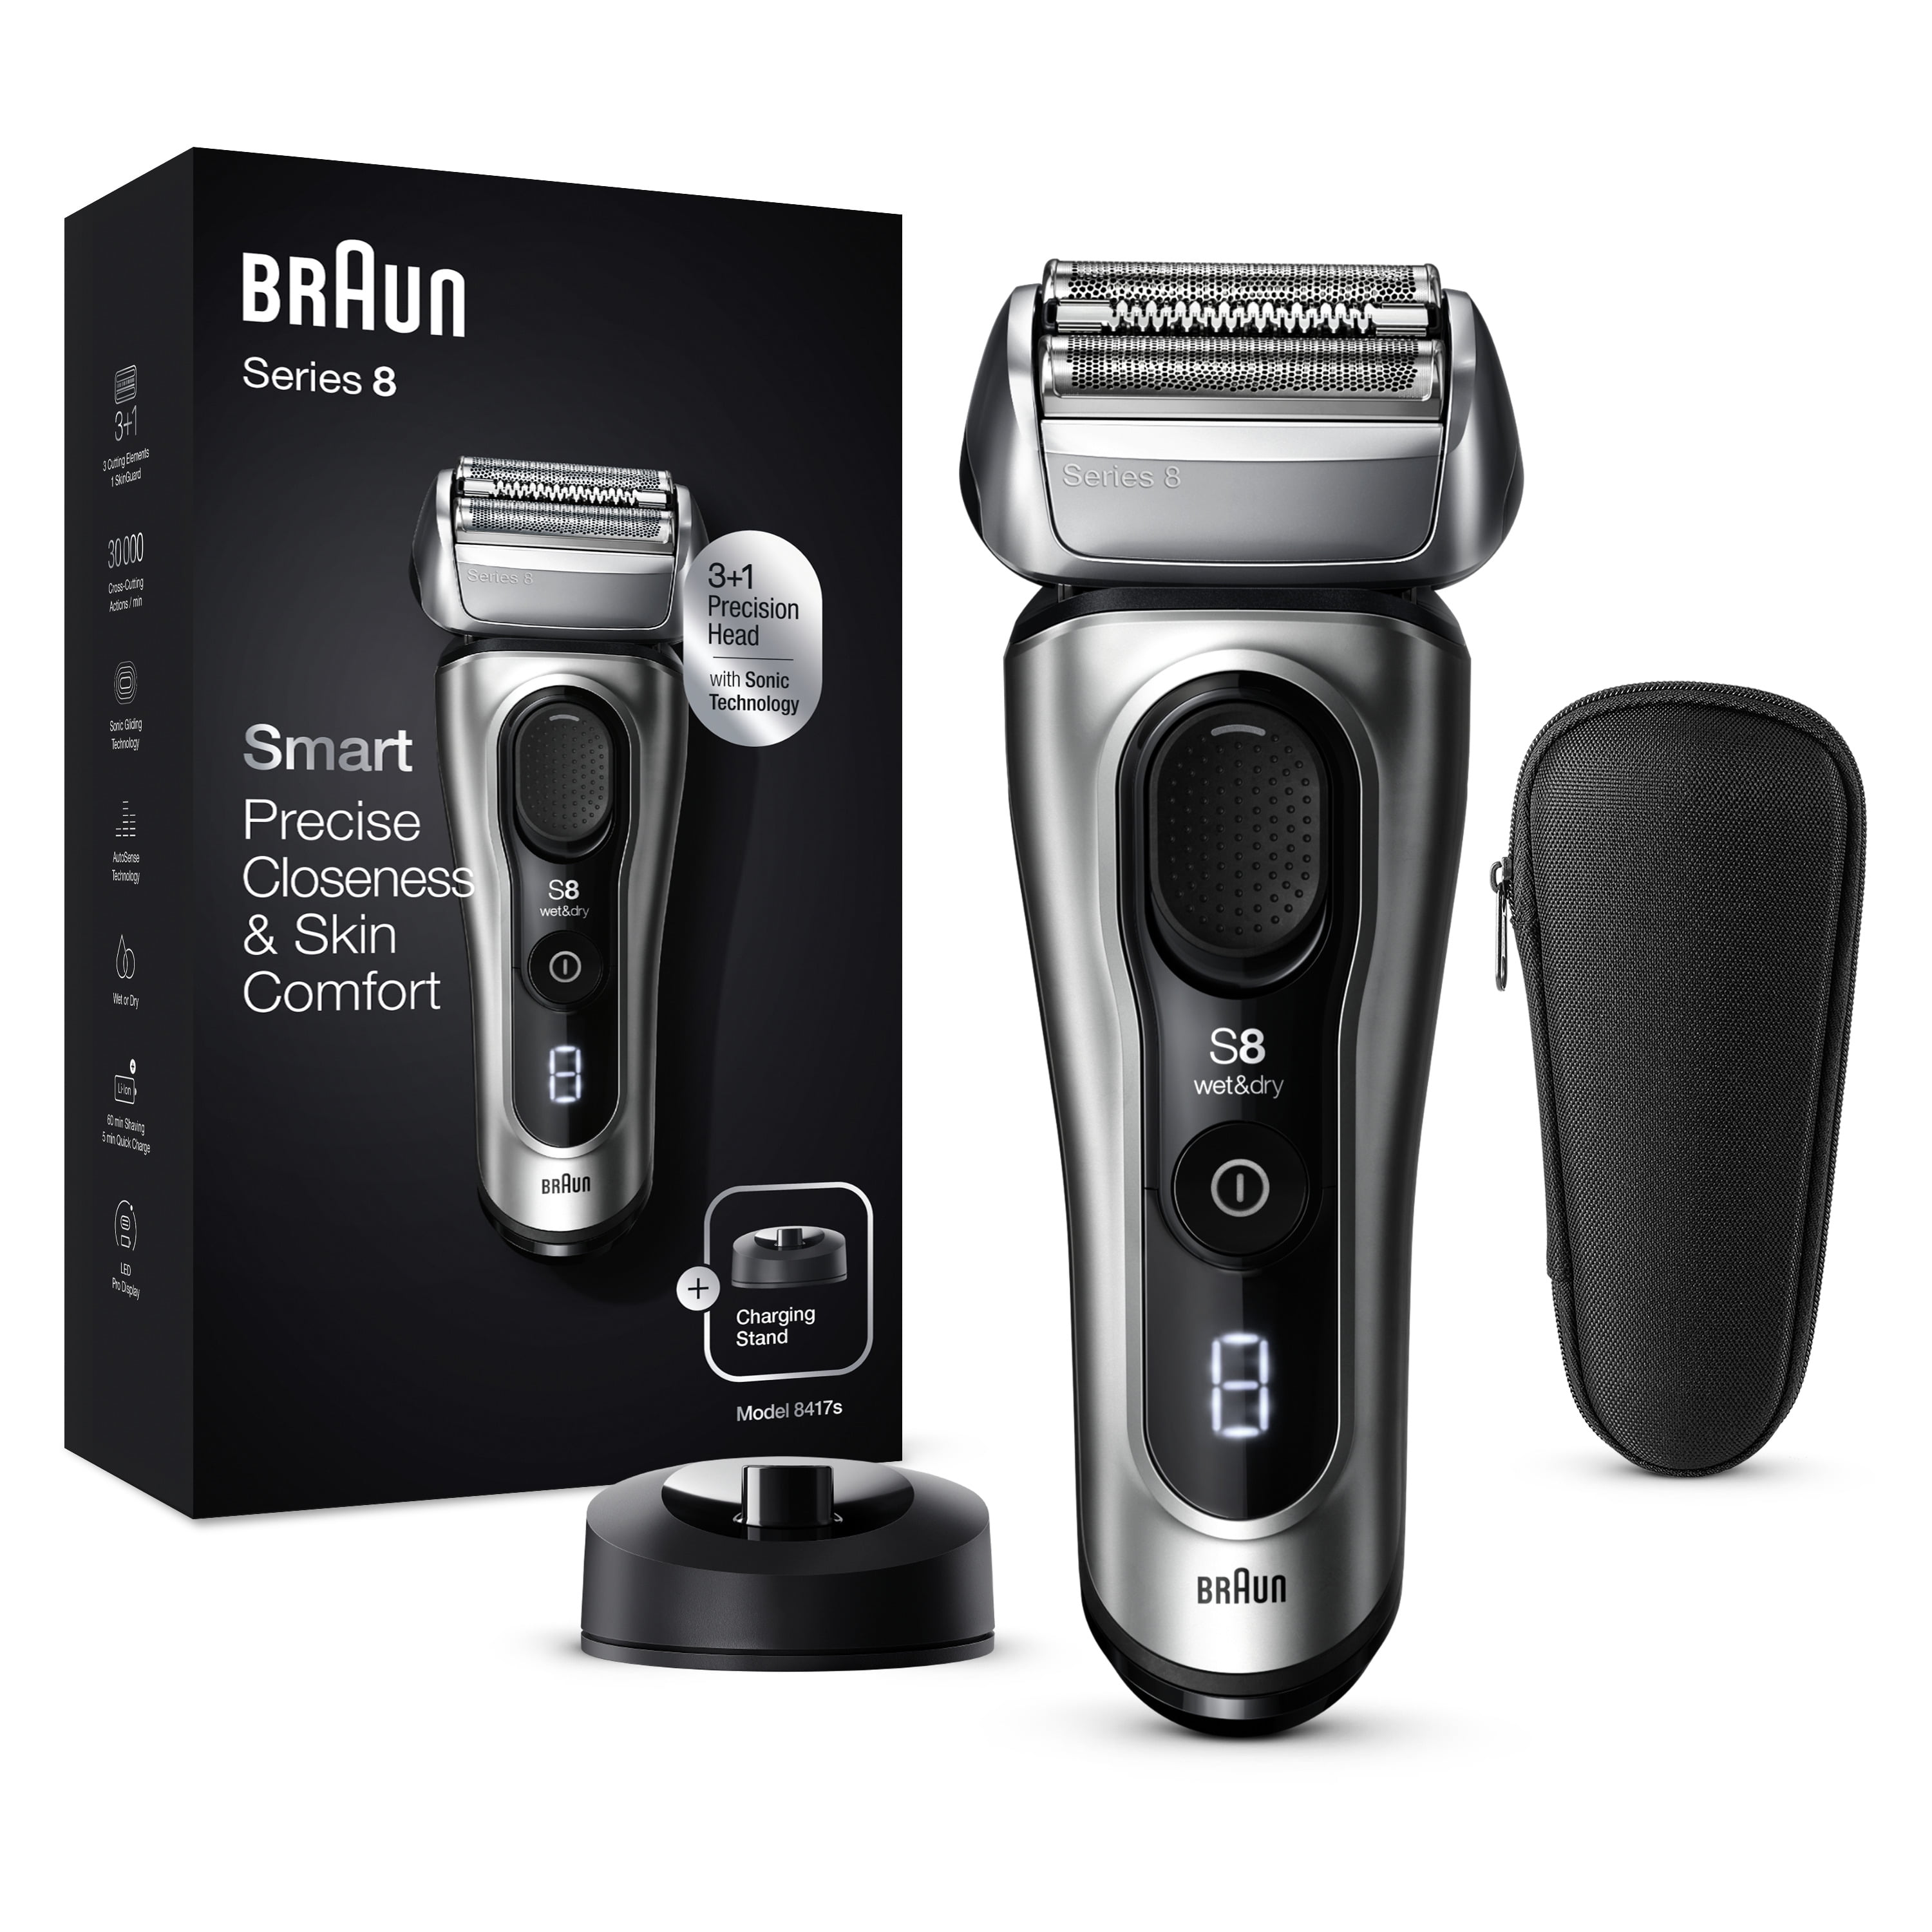 Braun Series 8 Sonic 8453cc Cordless Electric Shaver Wet&Dry - Tracking